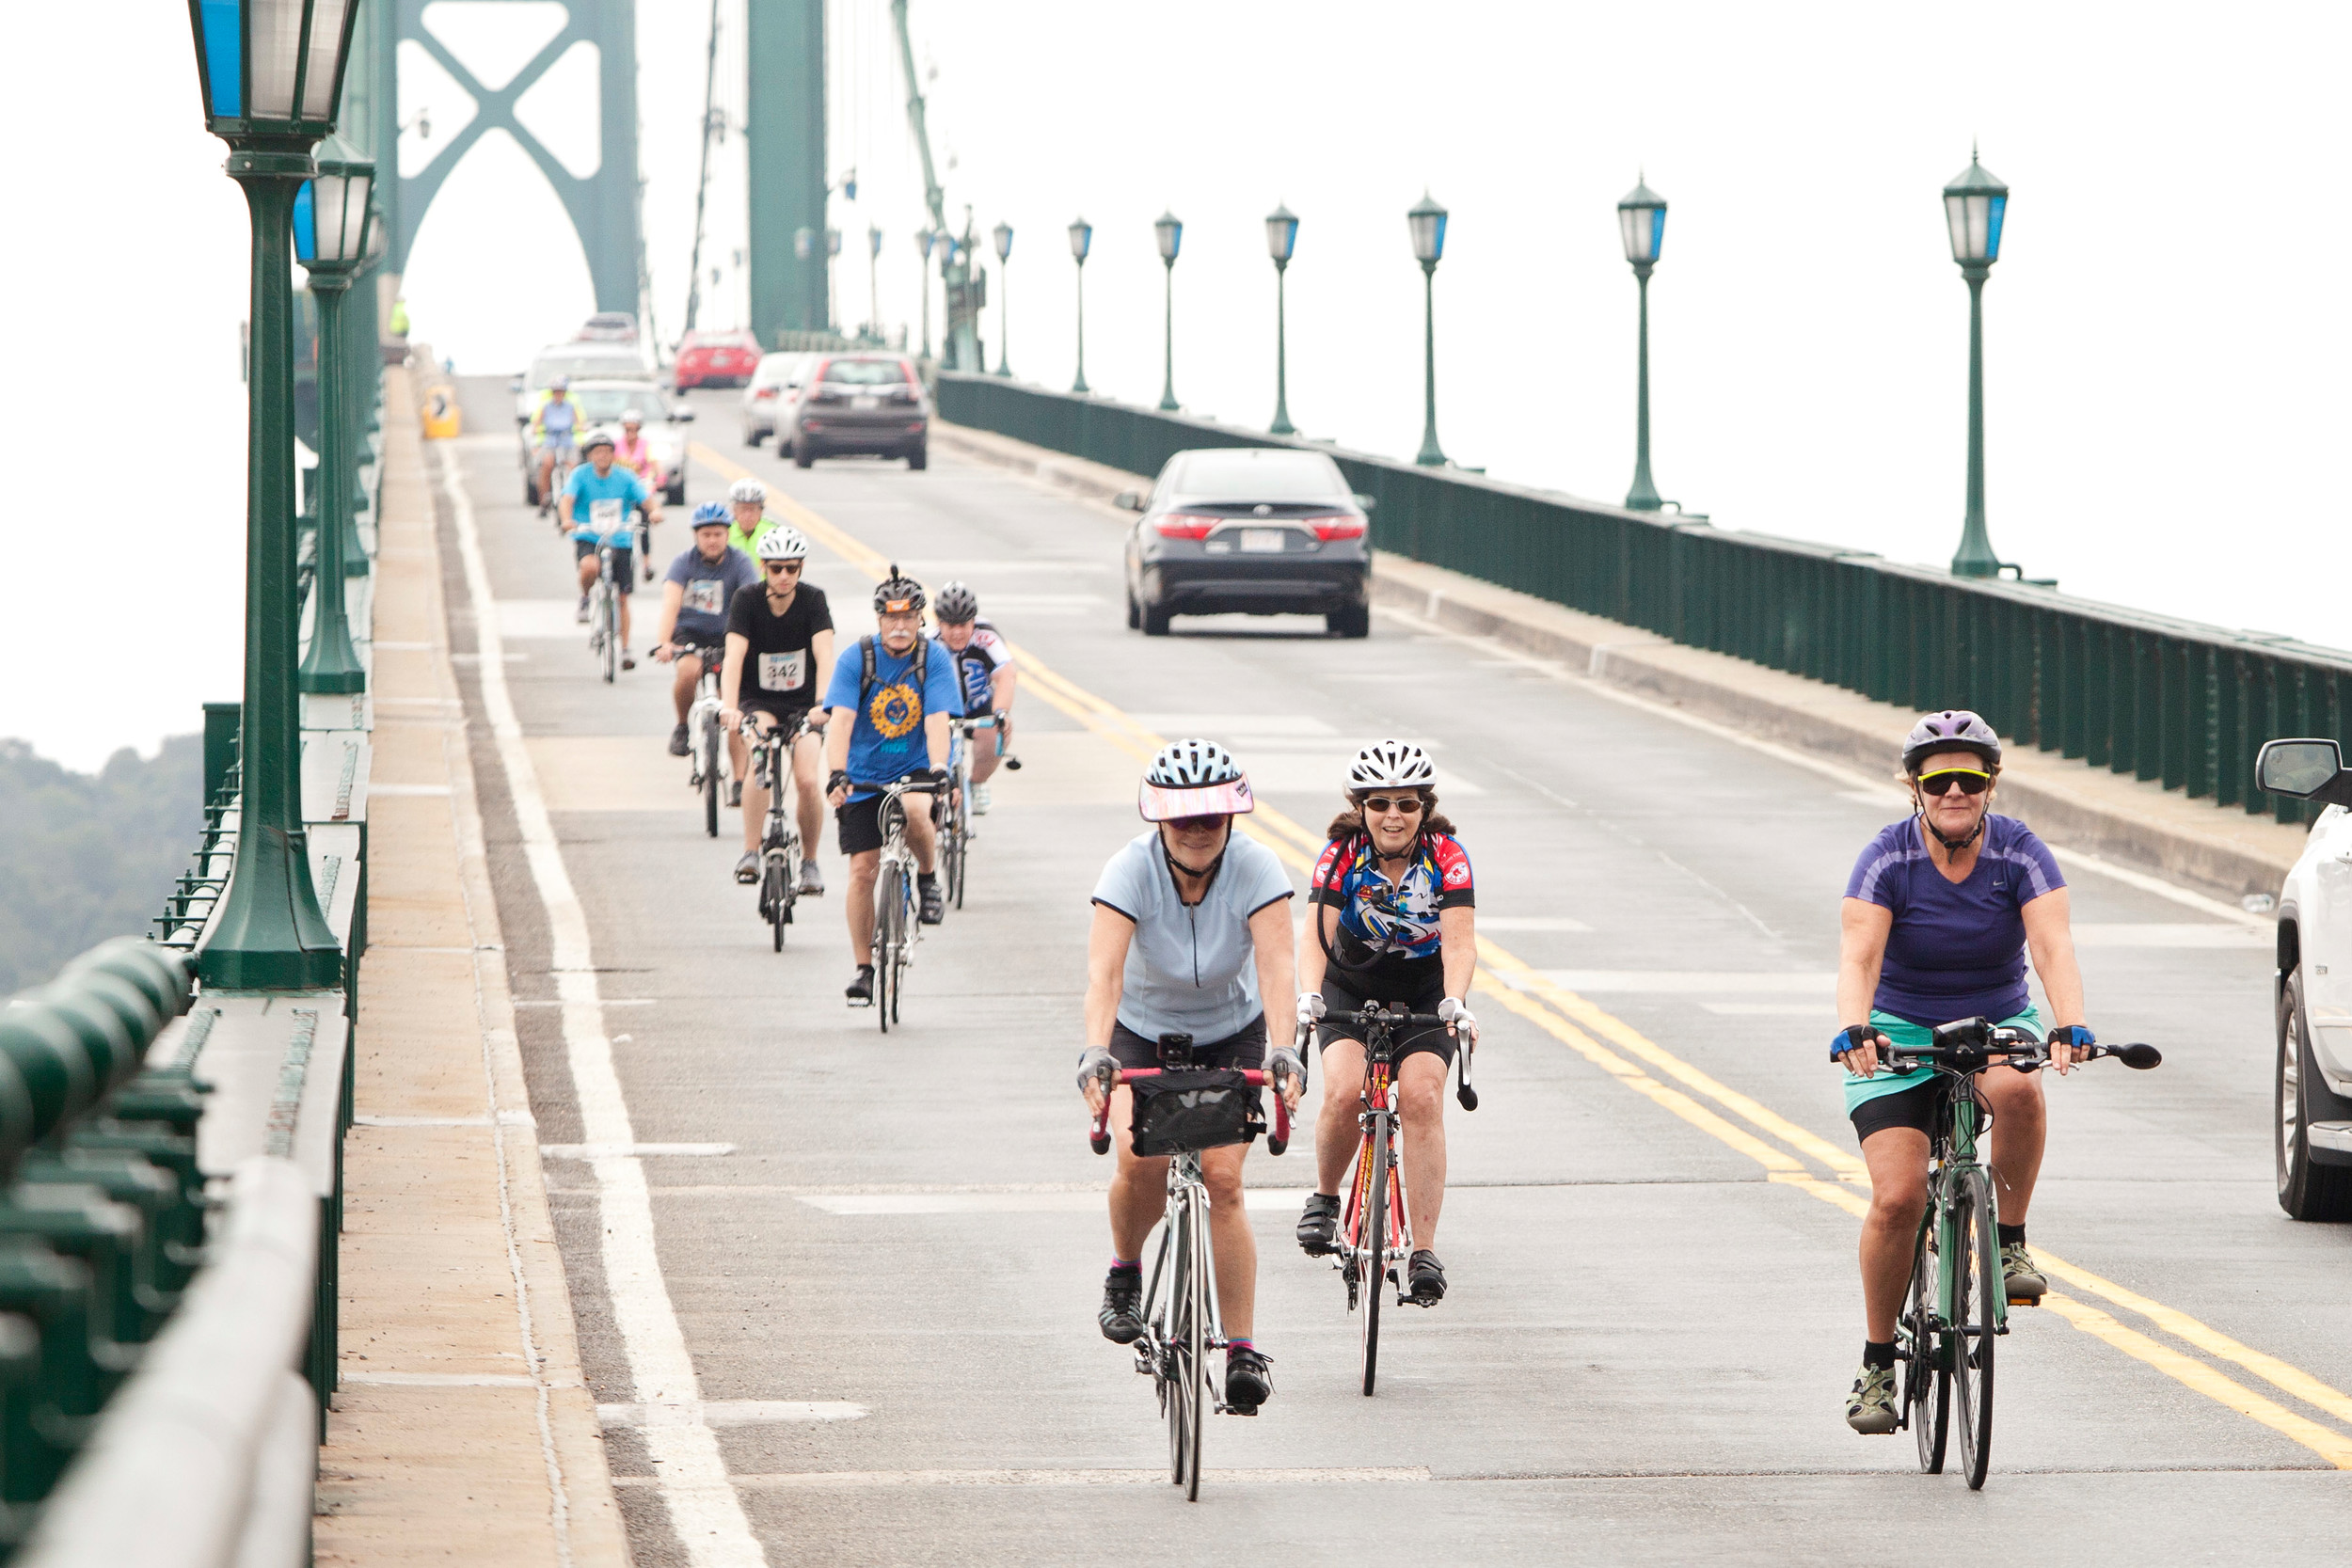 Bicyclists make their way across the Mt. Hope Bridge while nearing the finish line to the 4 Bridges Ride on Sunday.